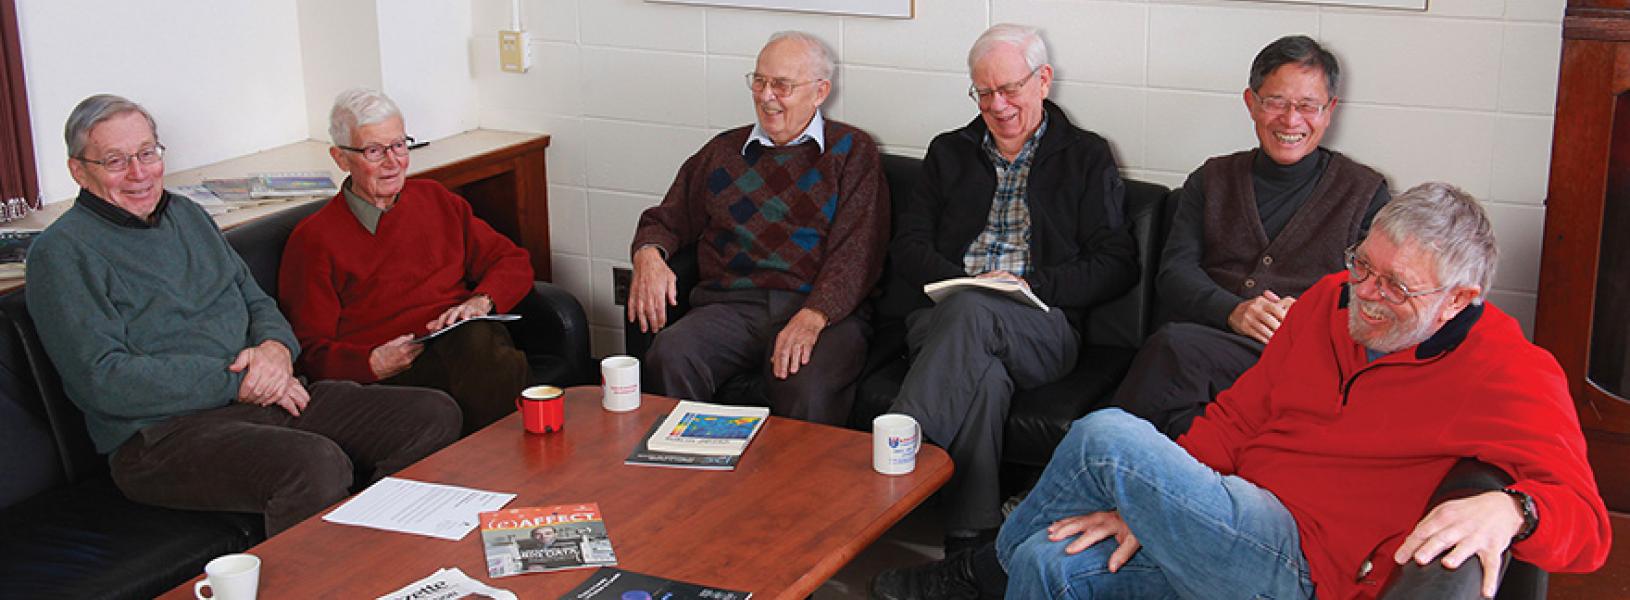 From left to right: Barry Robertson, Hugh Evans, George Ewan, Hamish Leslie, Hay Boon Mak and Peter Skensved, sitting around a table, laughing.